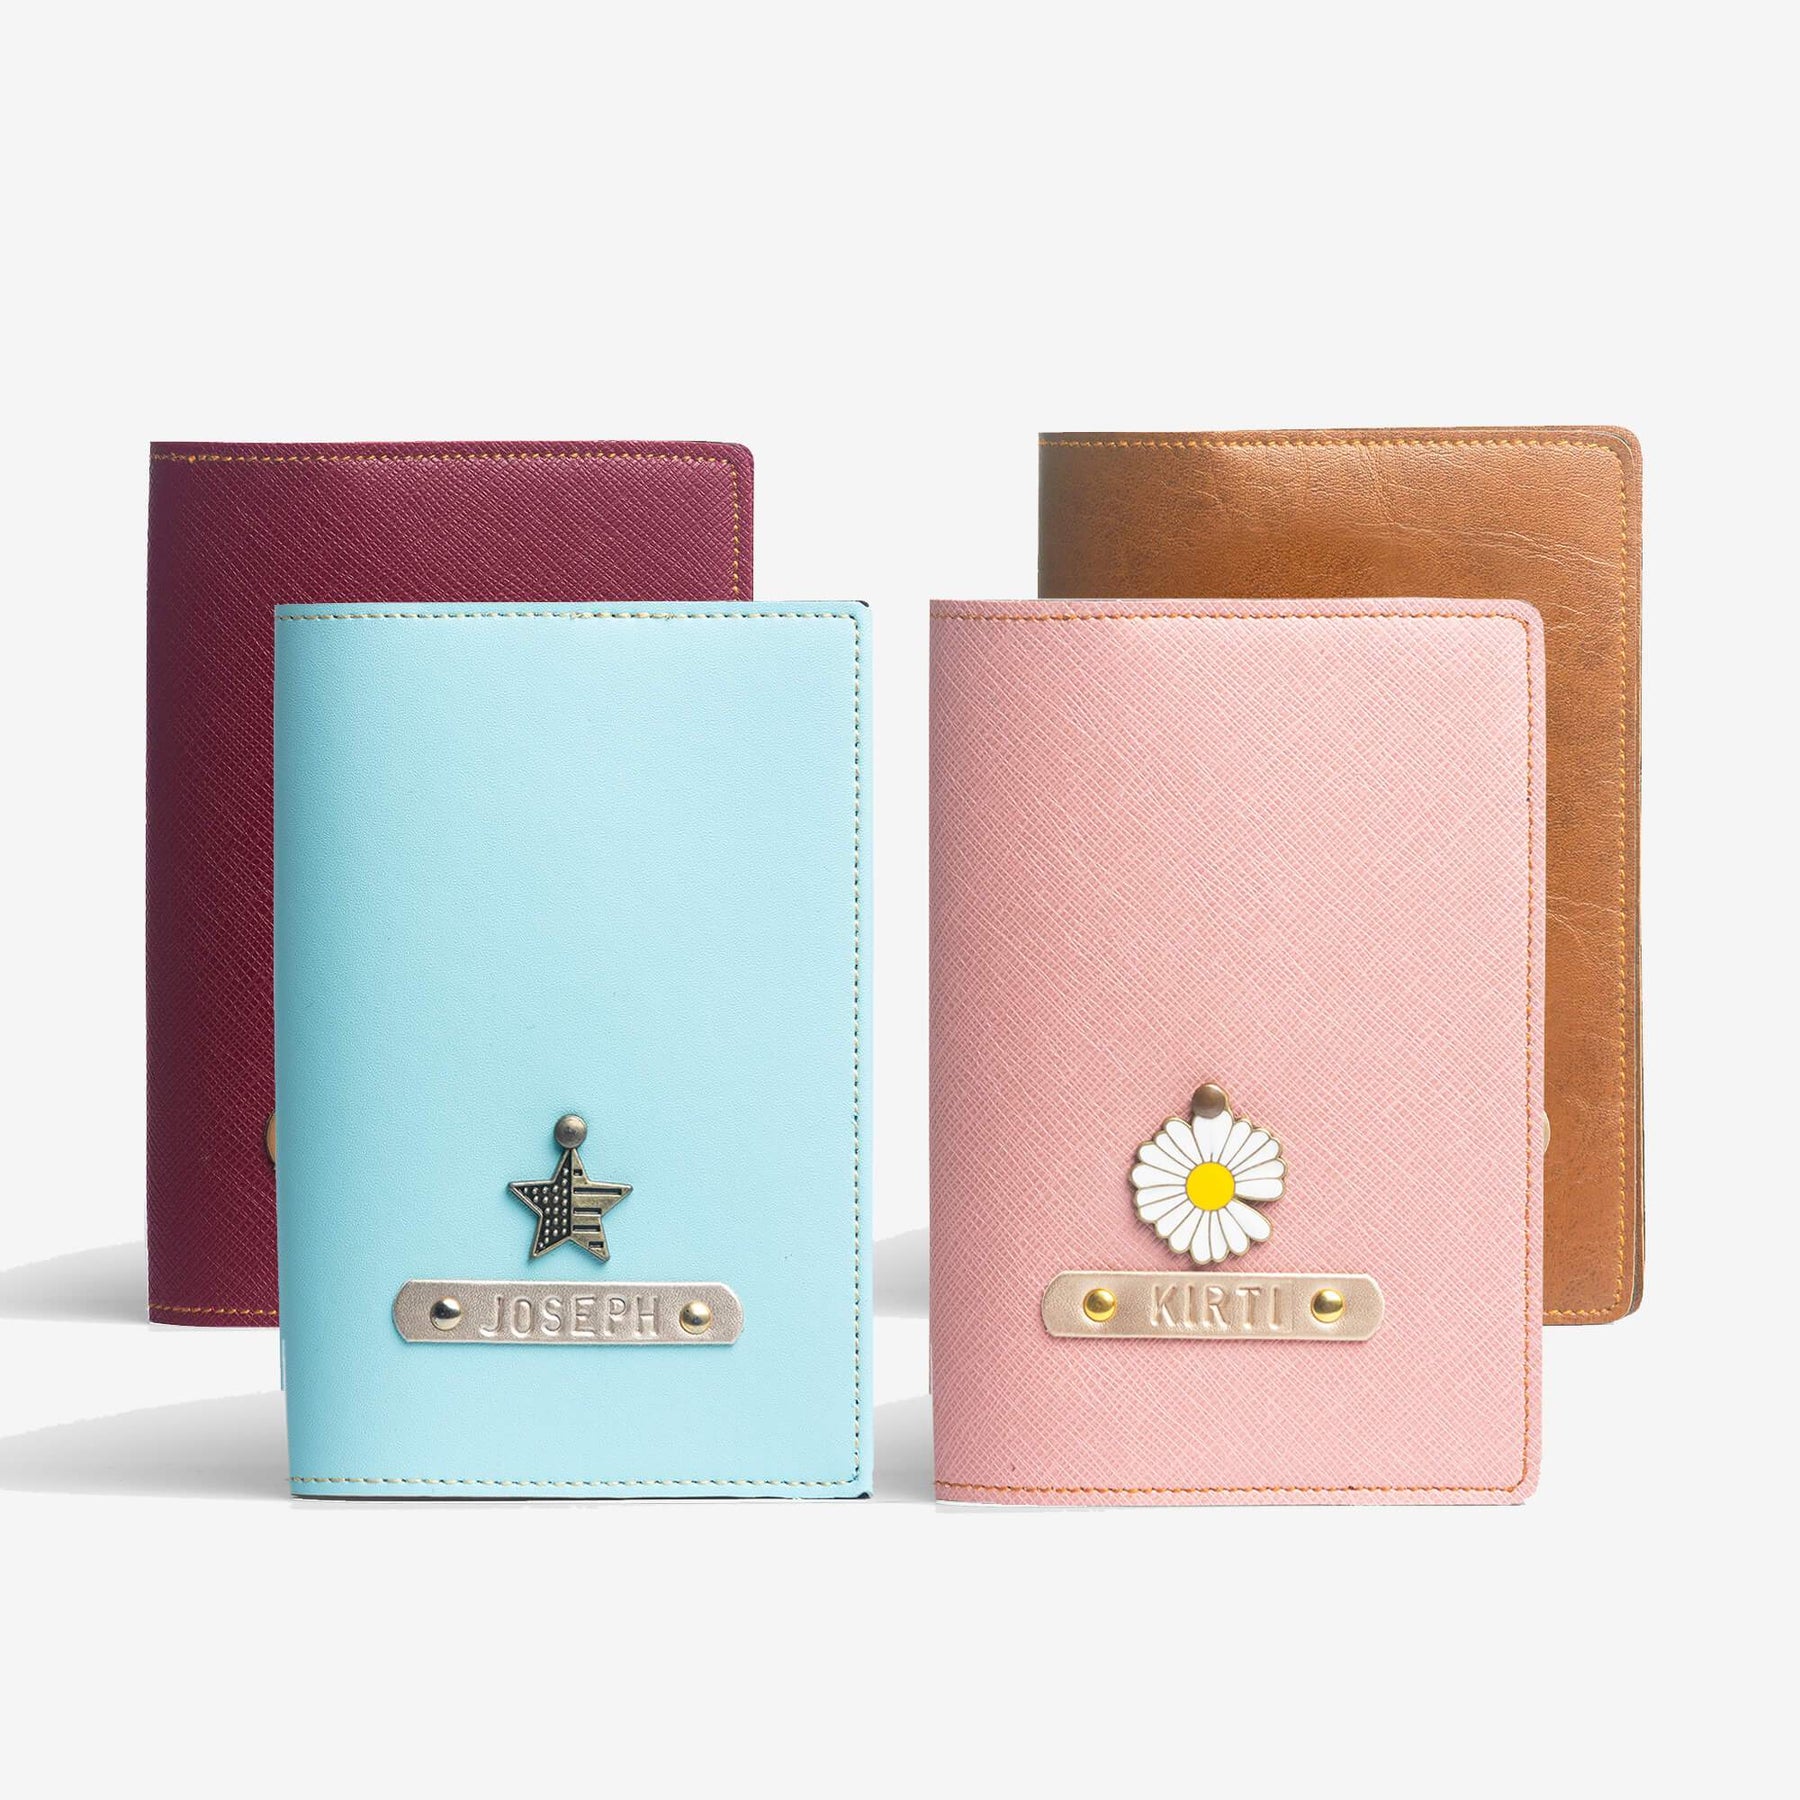 Family Goals - Set of 4 Passport Covers